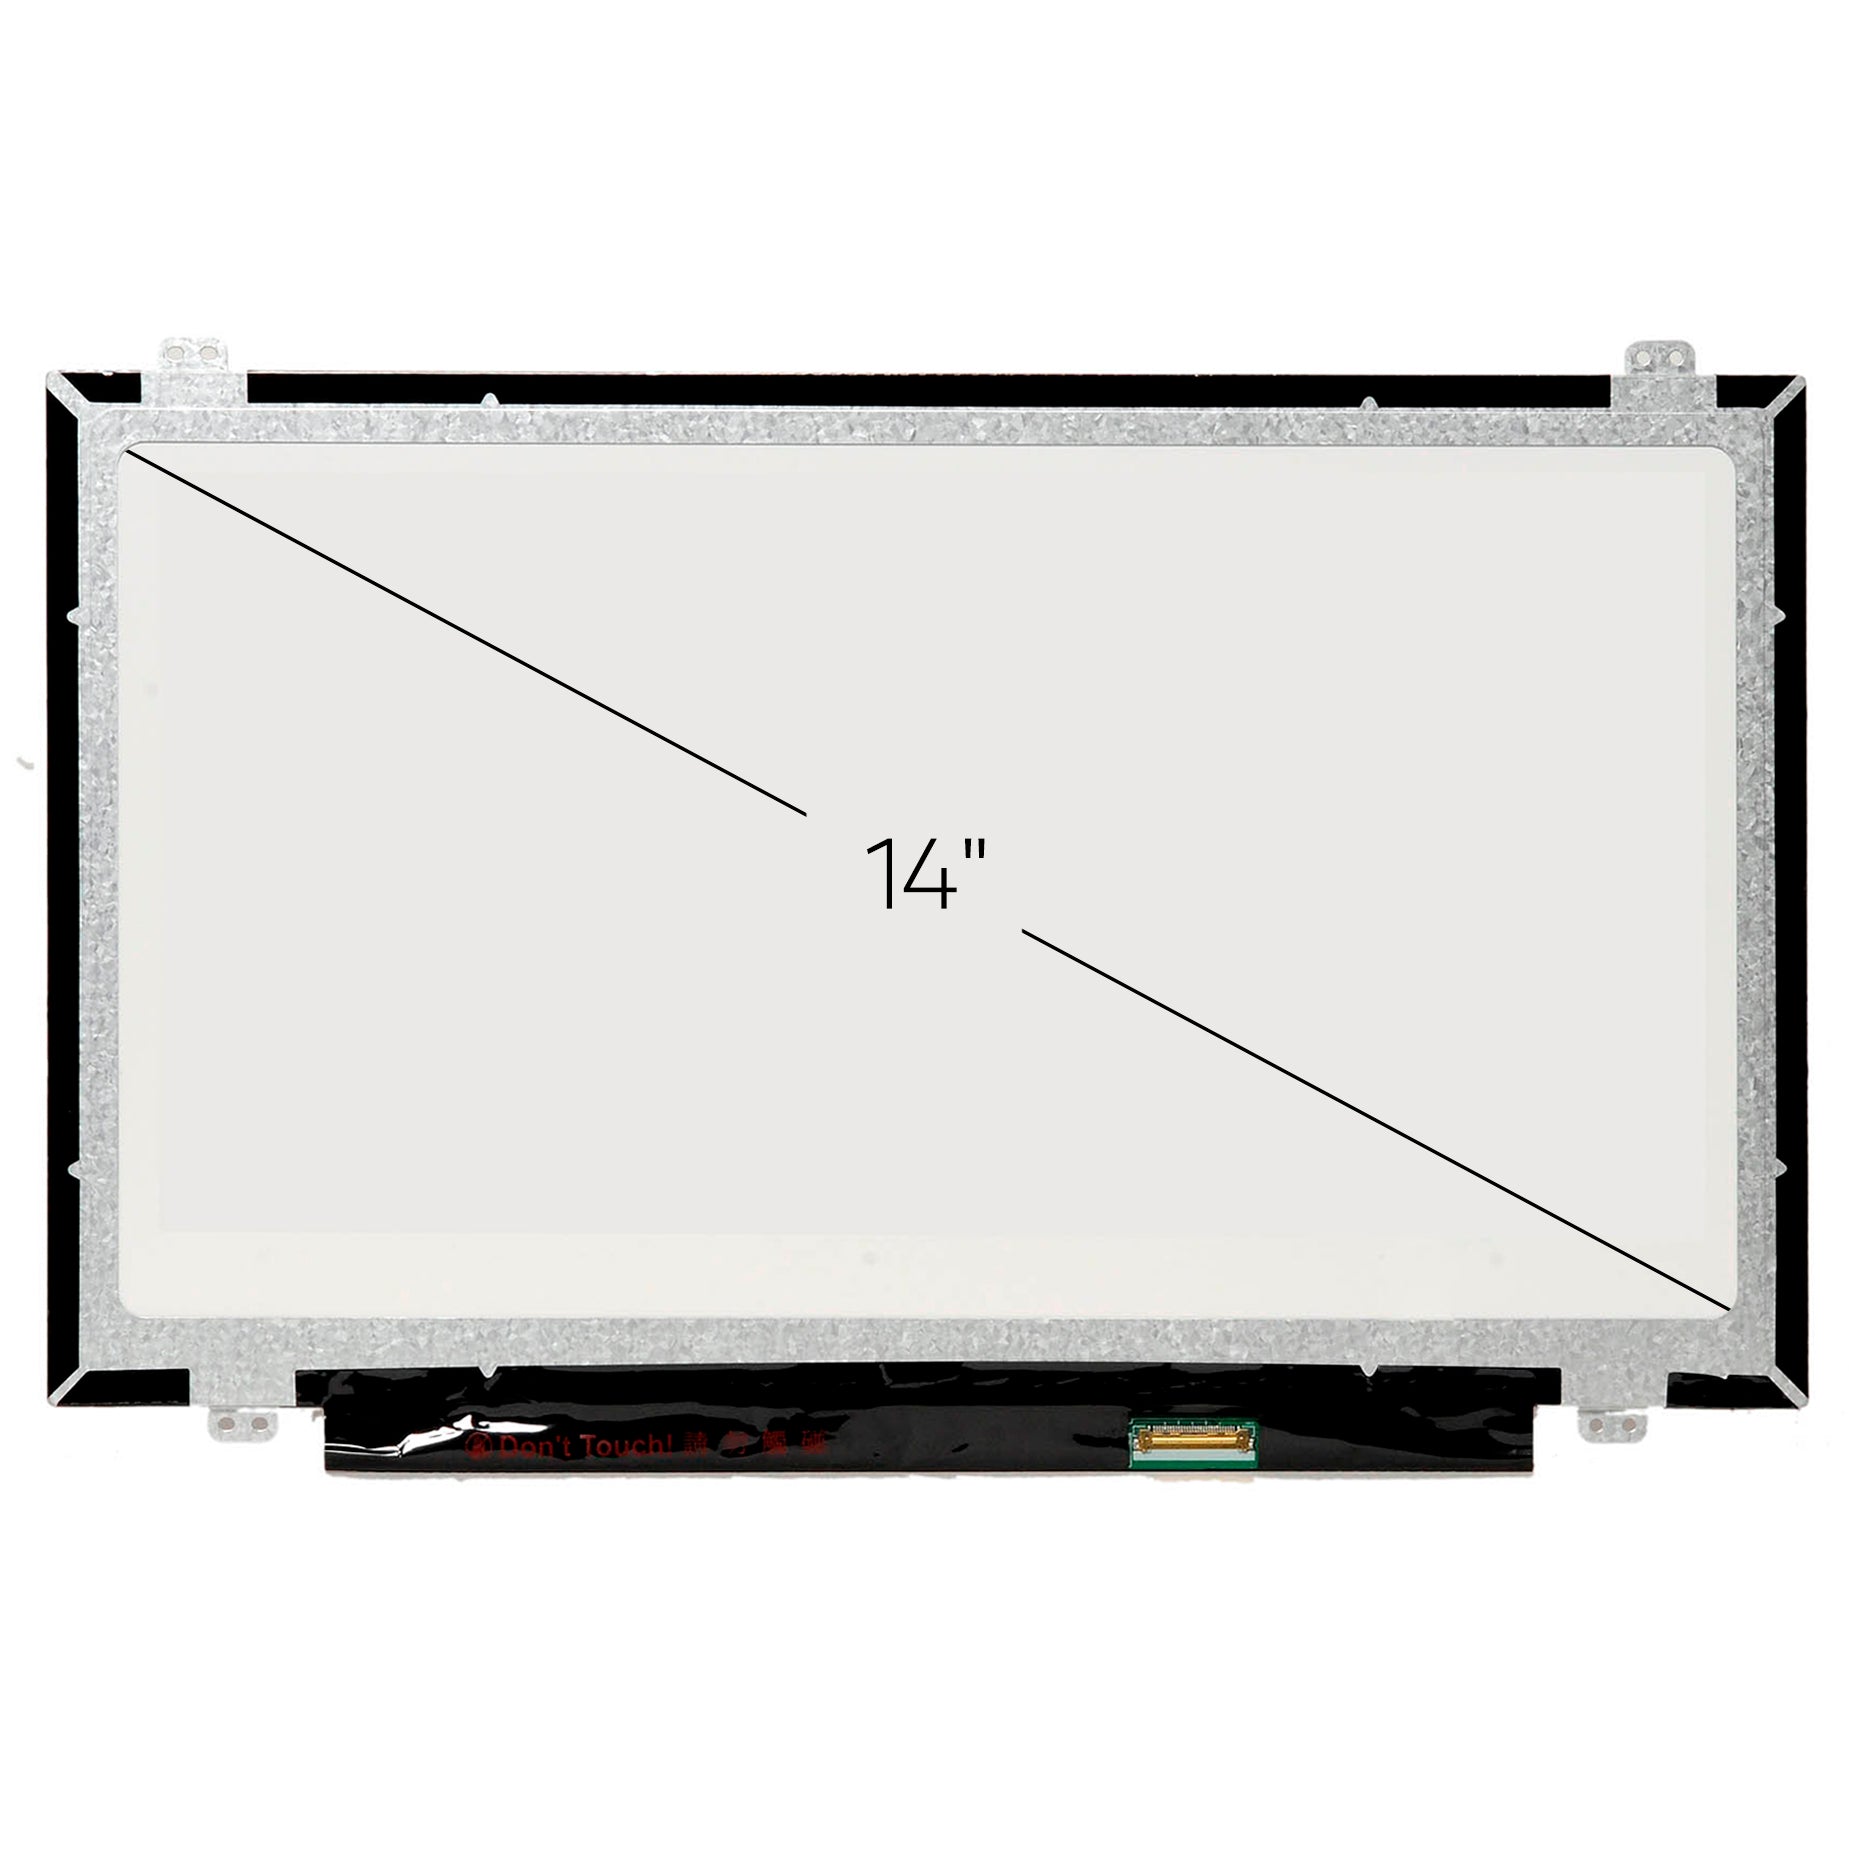 Screen Replacement for N140BGE-E33 REV.C2 HD 1366x768 Glossy LCD LED Display